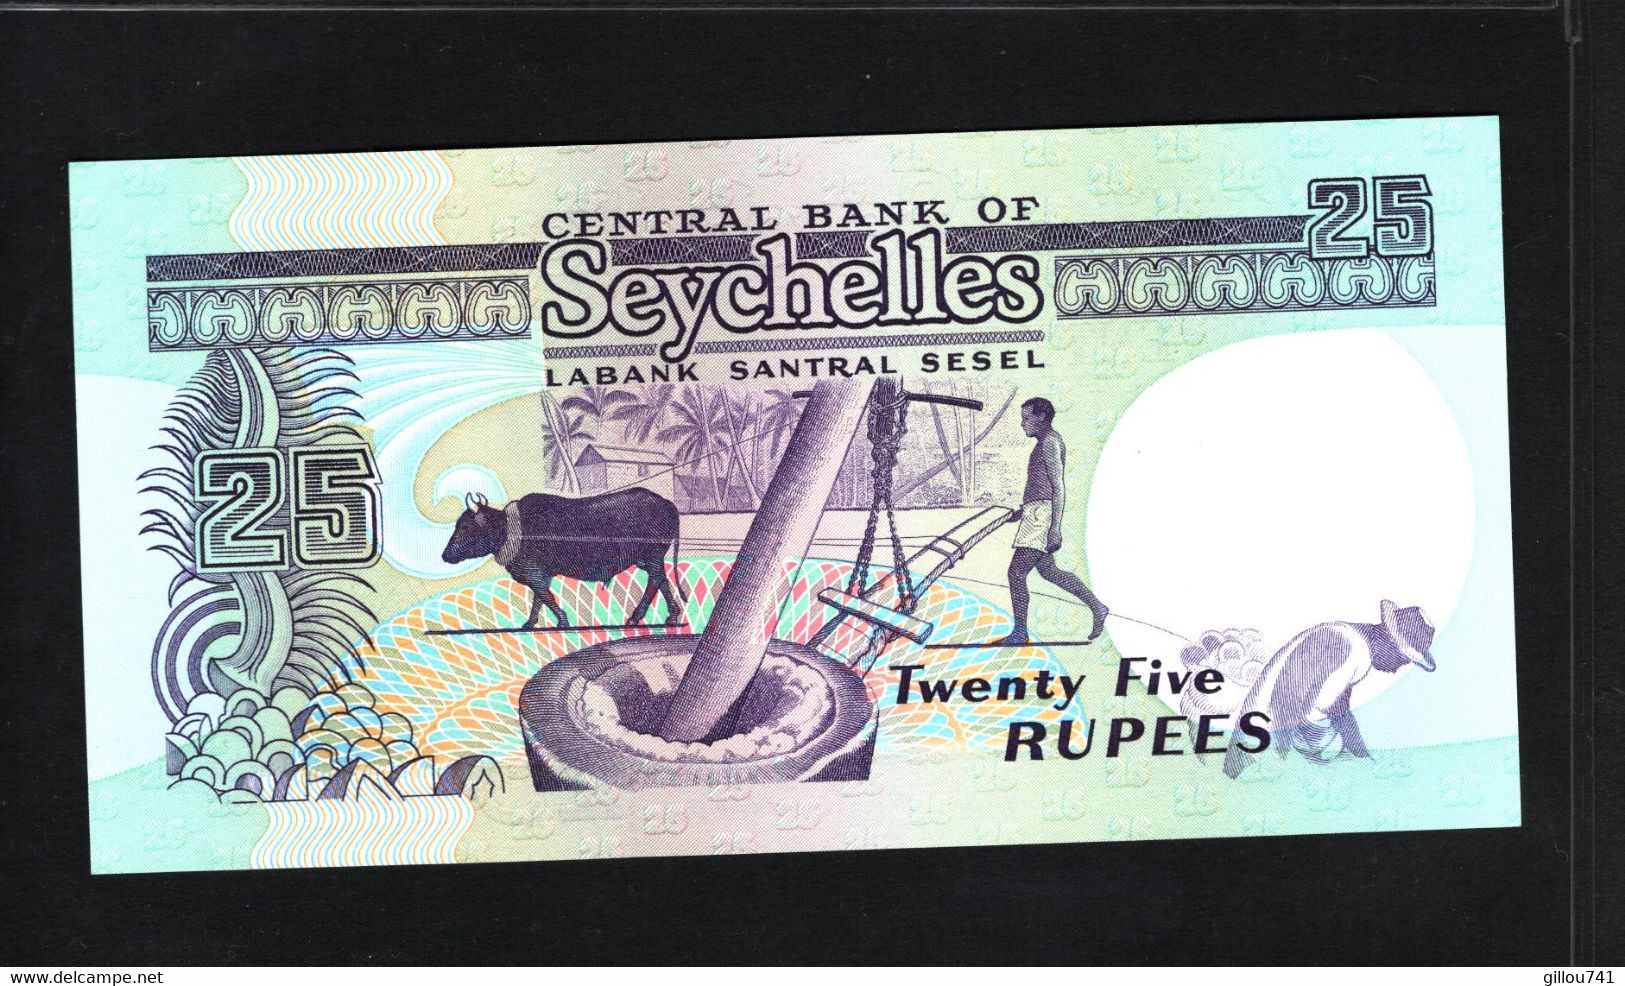 Seychelles, 25 Rupees/Roupi, 1989 ND "Bank Building" Issue - Seychelles